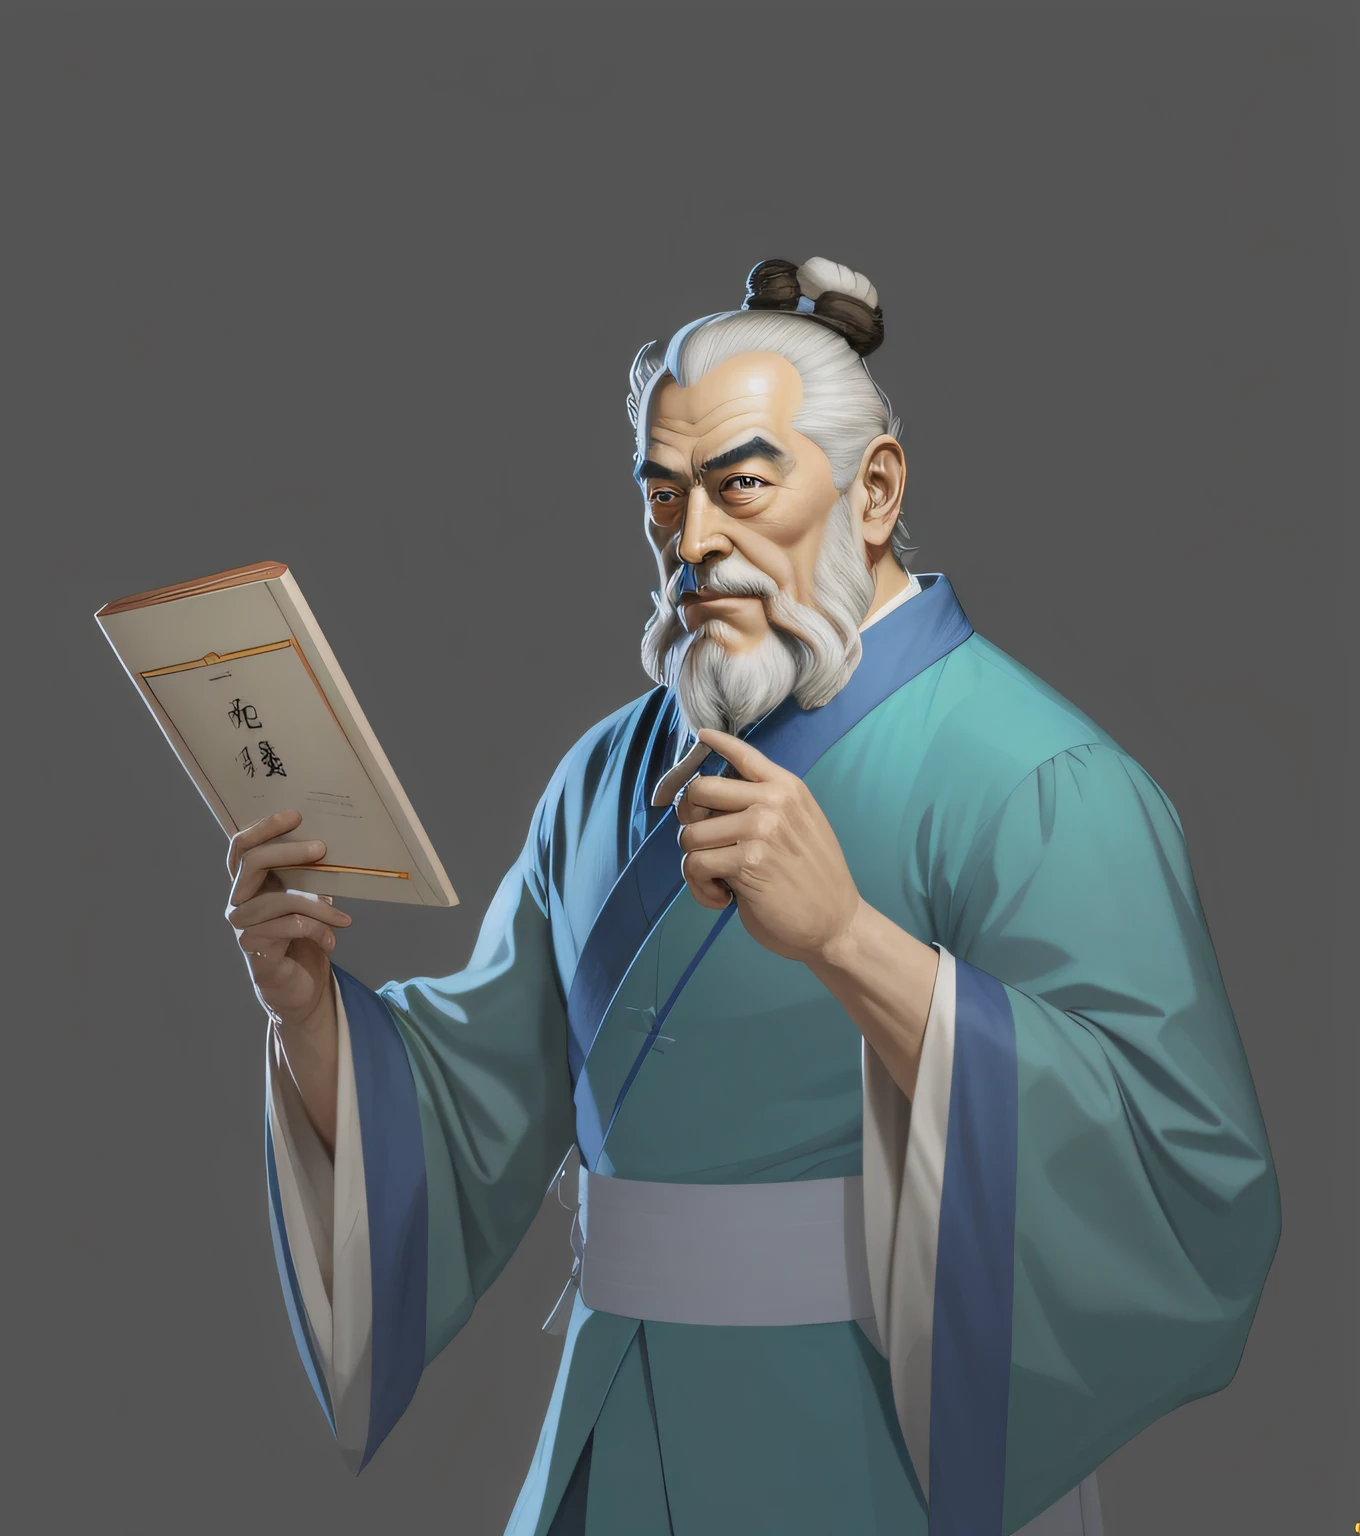 Great ancient Chinese thinker, statesman, educator, founder of the Confucian school, Confucius, inspired by Max Magnus Norman, complete portrait of the electronic master, inspired by Jean Bello, Nicolas Tesla, Gillium Pongiruppi, portraits of characters, Luis Ricardo Farero, portraits of epic elegance, Santiago Martínez Delgado, Frank Xavier-Linedecker style digital figure concept art, white, scientific illustration, Magali-Villeneuve, Walt Disney, Realistic Depiction of Light Style, Realistic Depiction of Light, Simplified and Stylized Portrait, Surreal, Animated Energy, Surreal Portrait